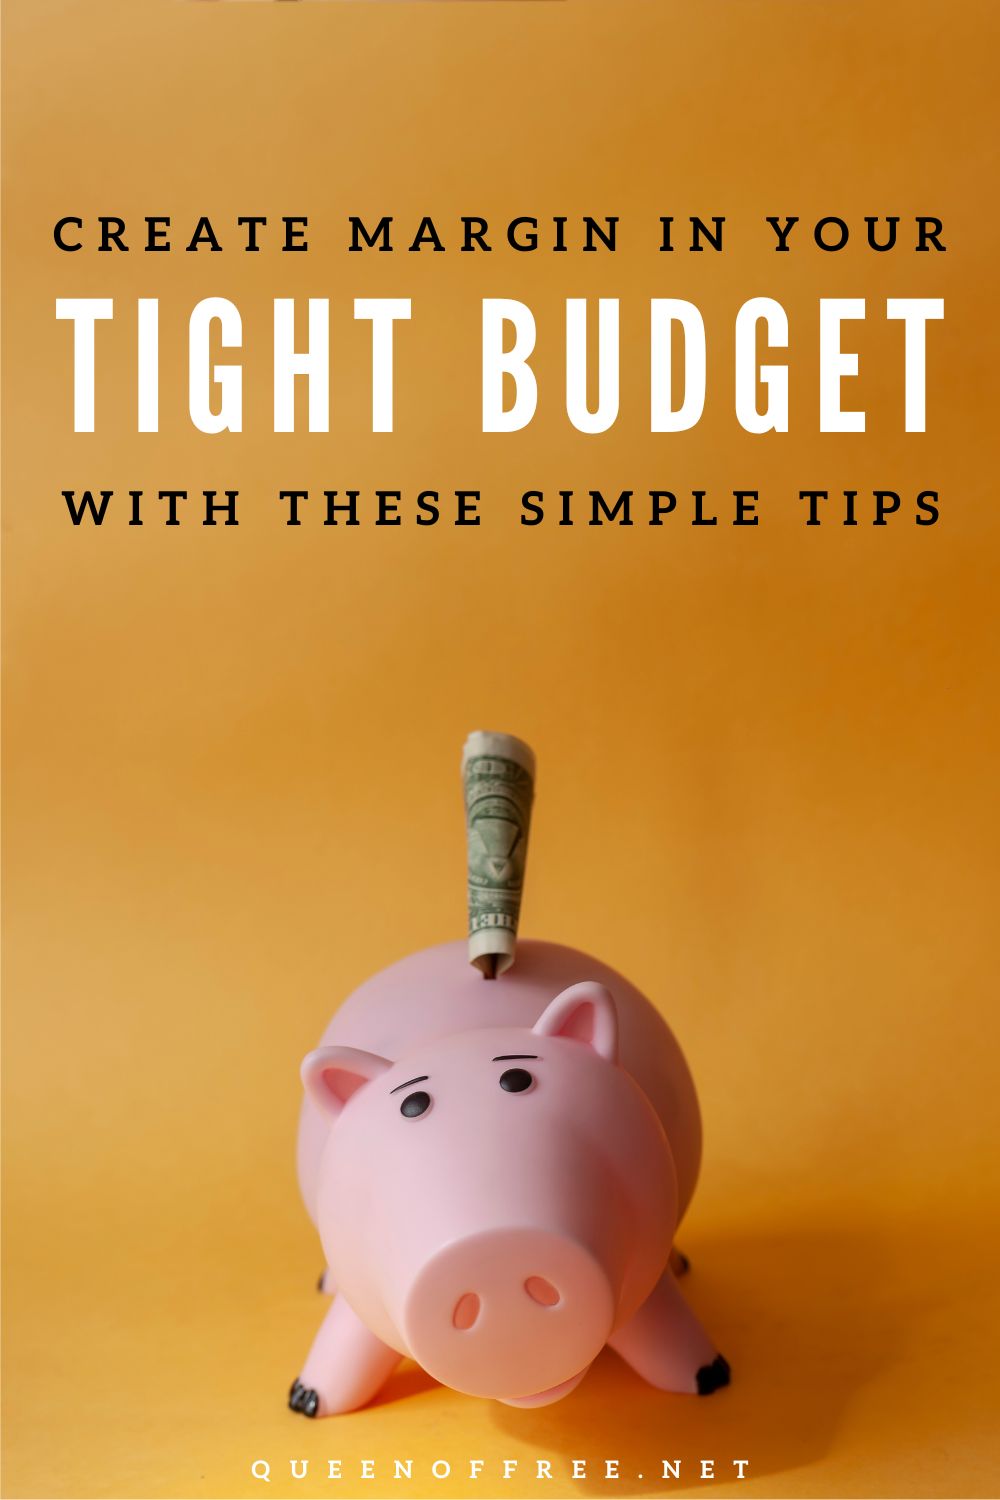 Inflation and gas prices have you feeling squeezed? Create margin in your tight budget with these smart (and simple) ideas!